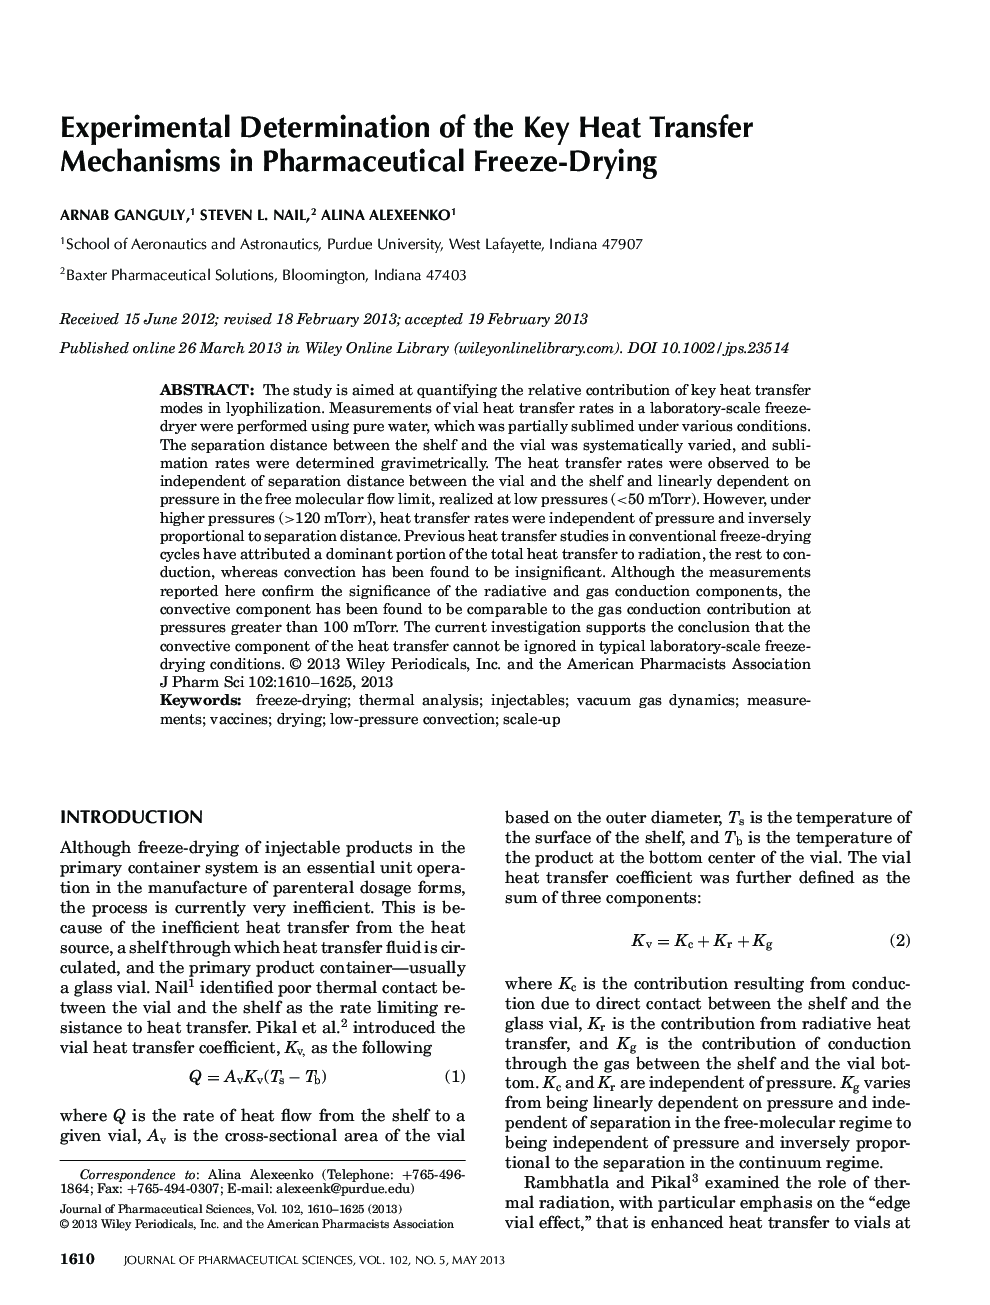 Experimental Determination of the Key Heat Transfer Mechanisms in Pharmaceutical Freeze-Drying